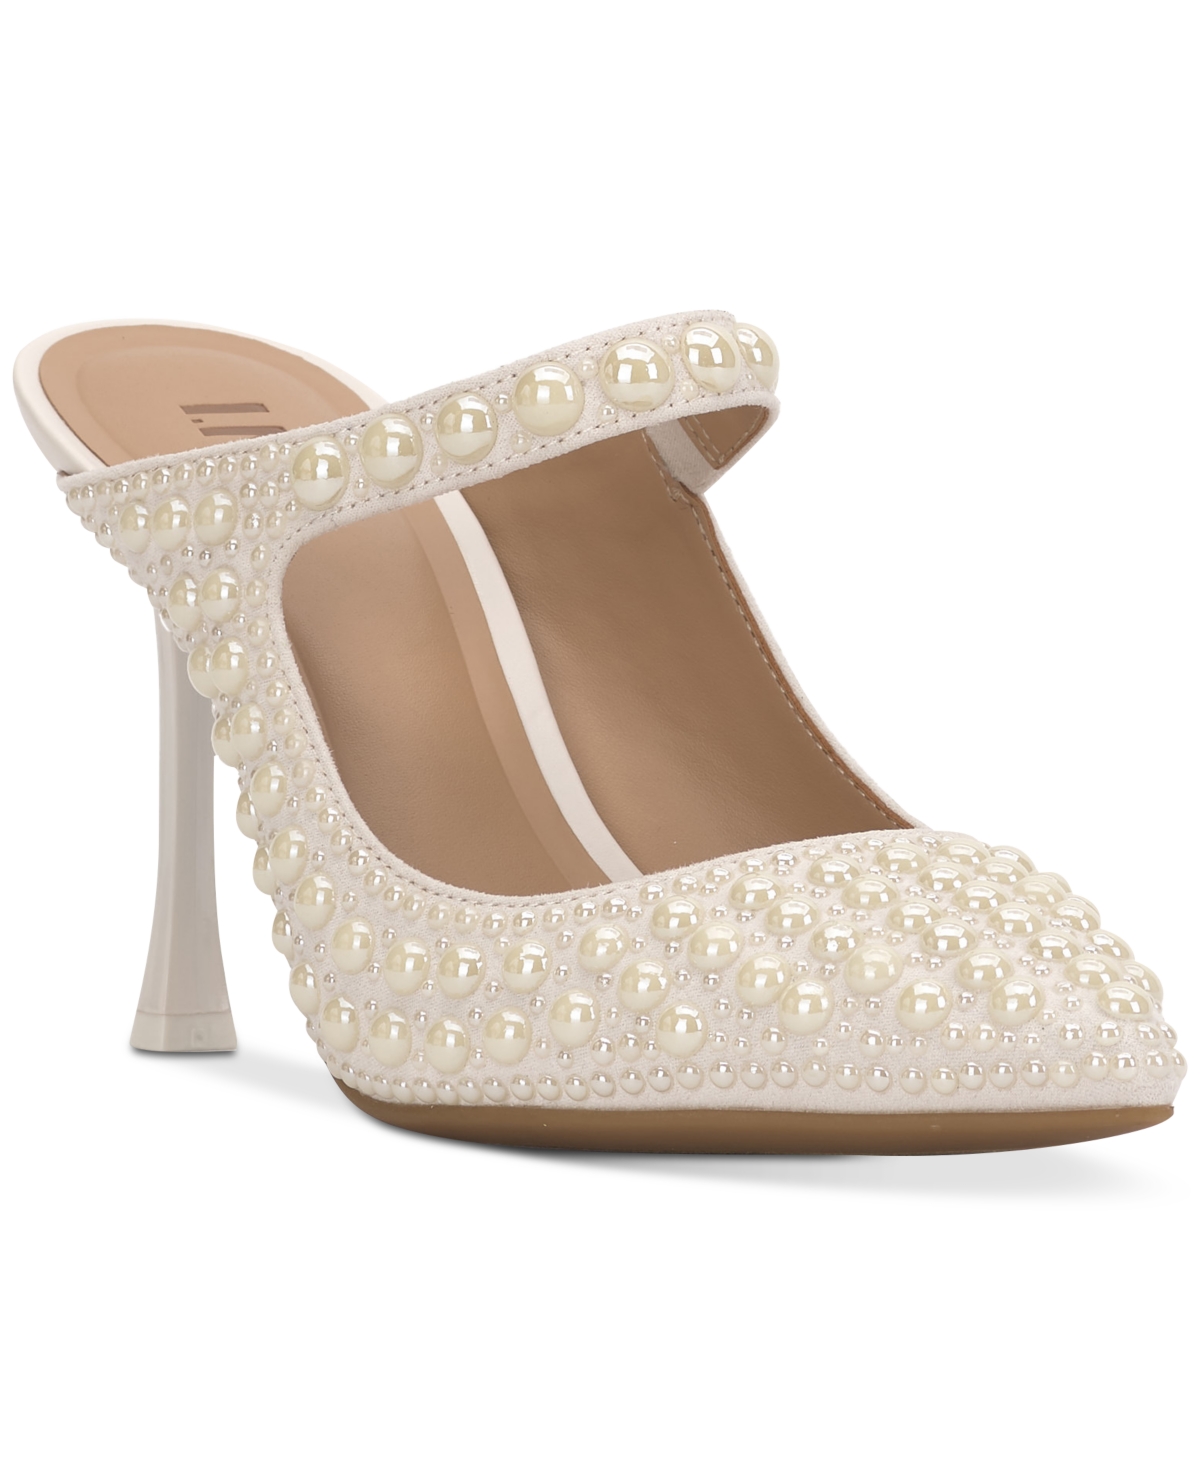 Sazma Embellished Mule Pumps, Created for Macy's - Pearl